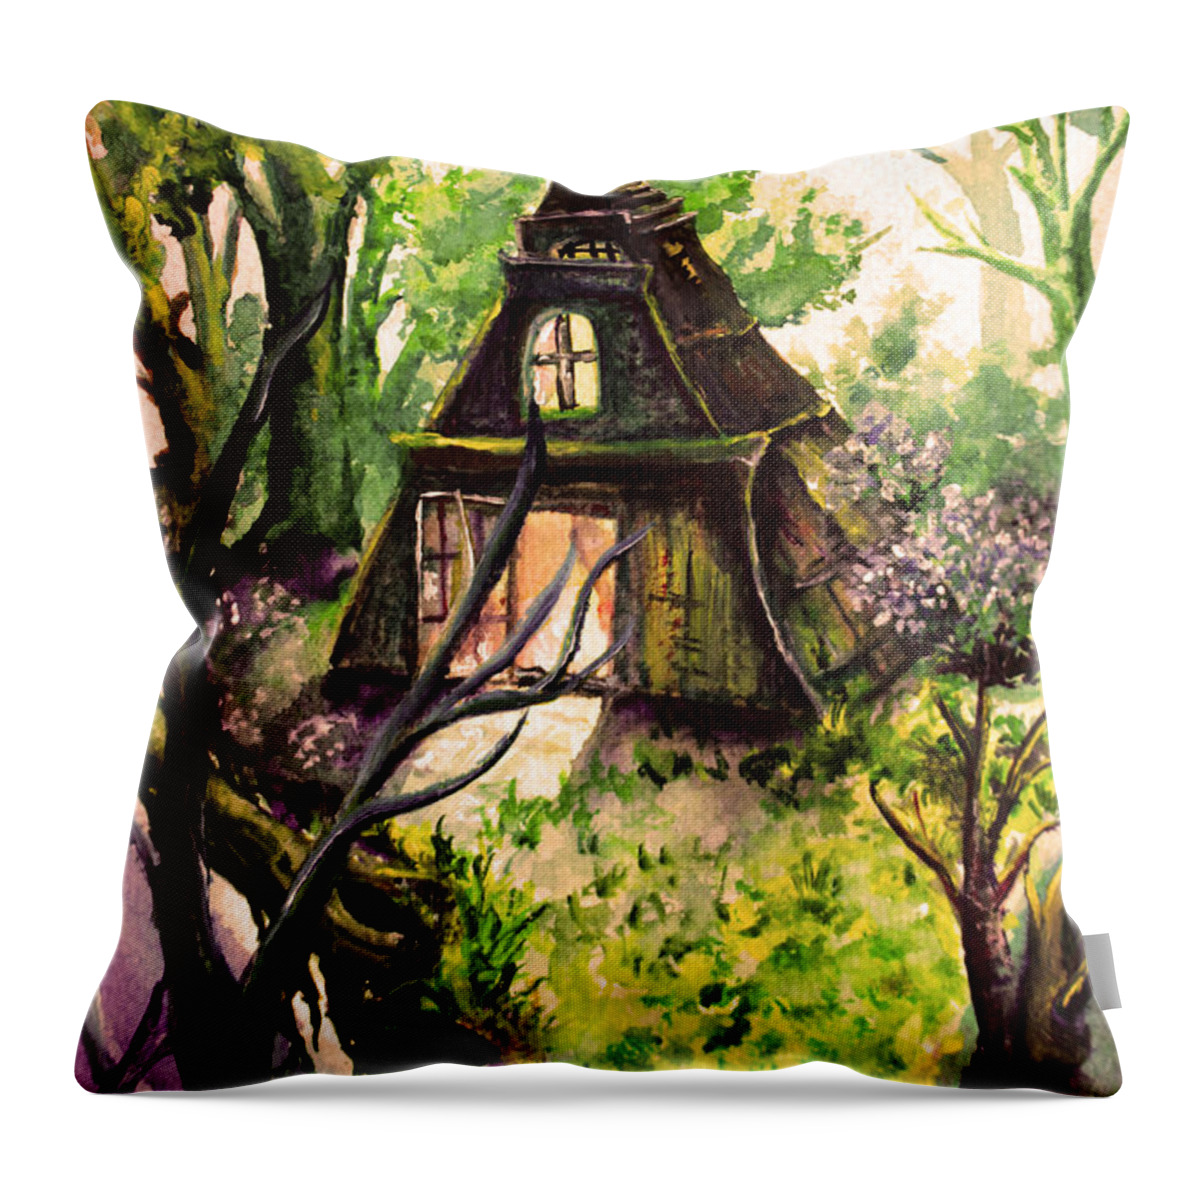 Beautiful Throw Pillow featuring the painting Home #1 by Medea Ioseliani